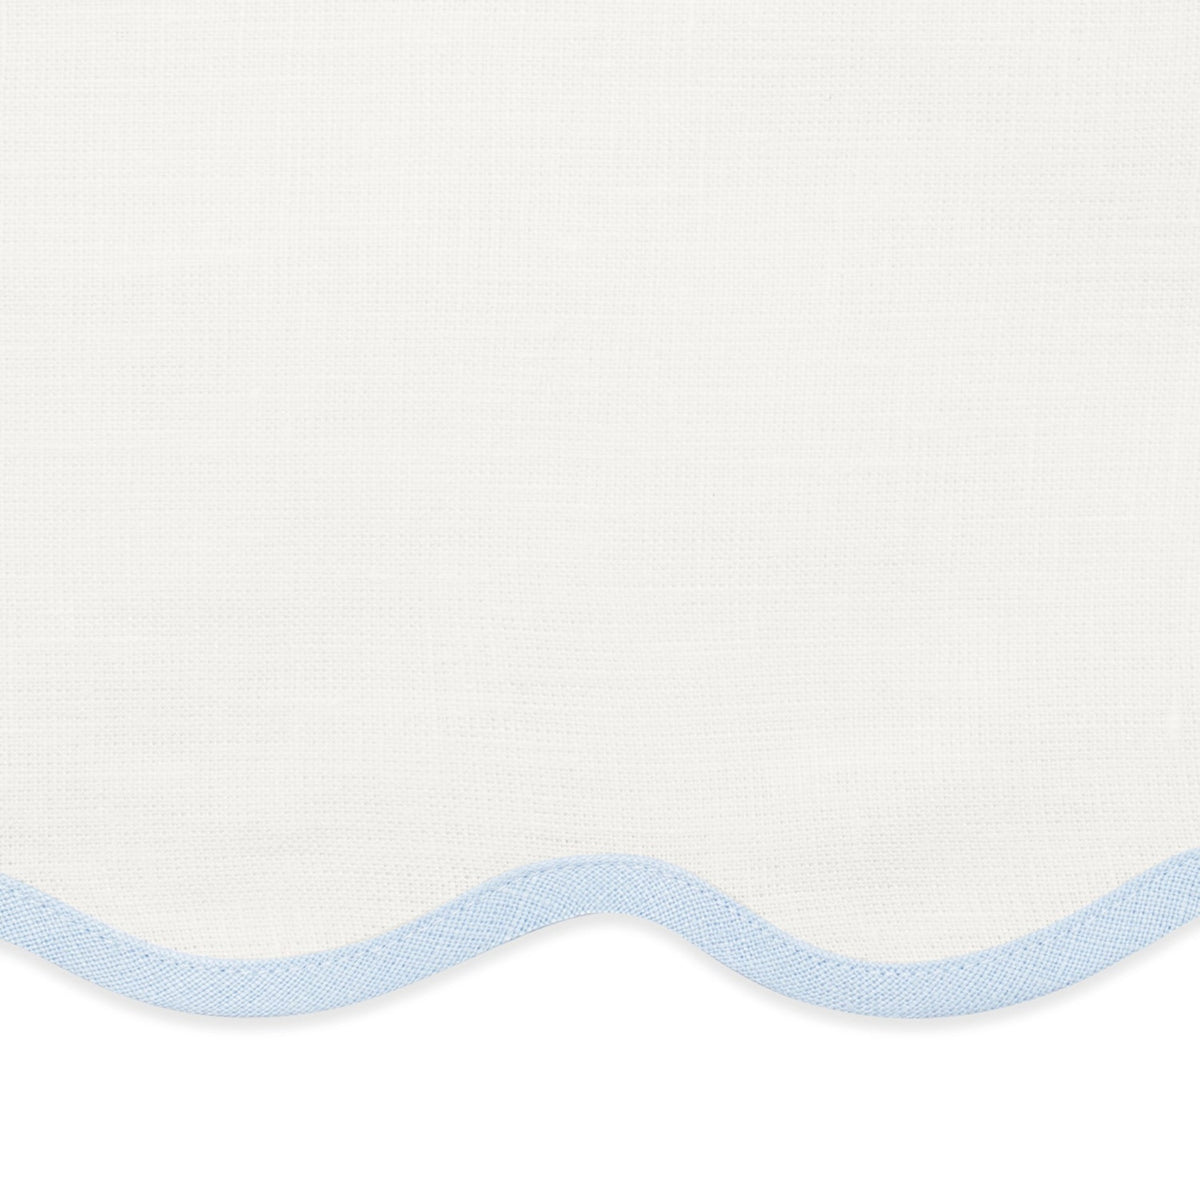 Swatch Sample of Matouk Scallop Edge Table Linens in Ice Blue Color